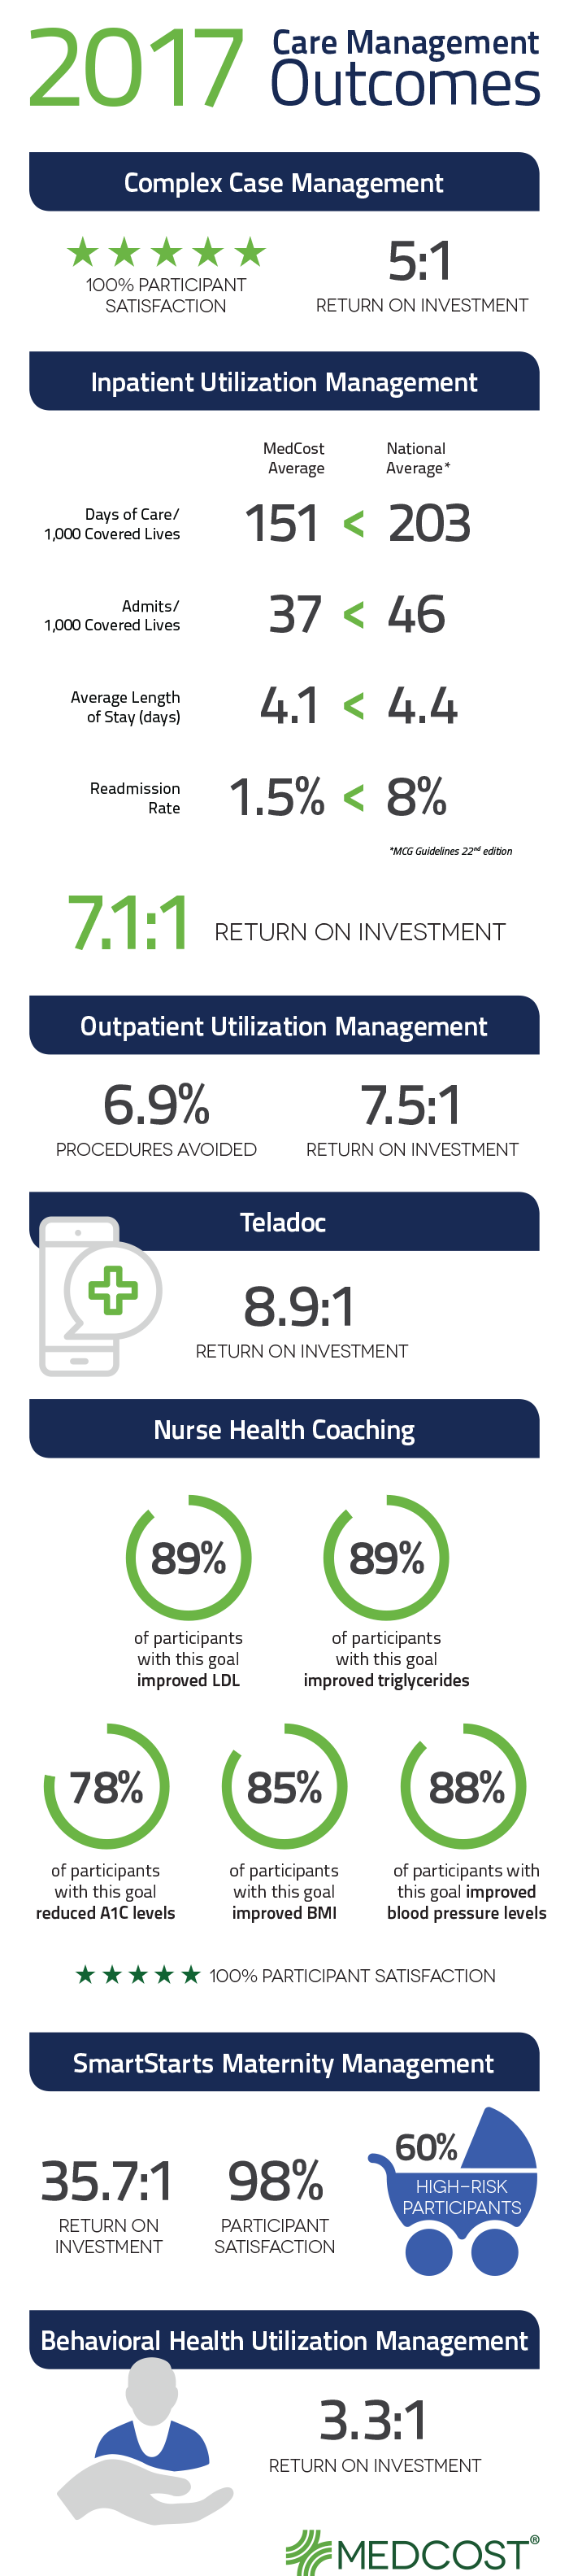 2017 Care Management Outcomes